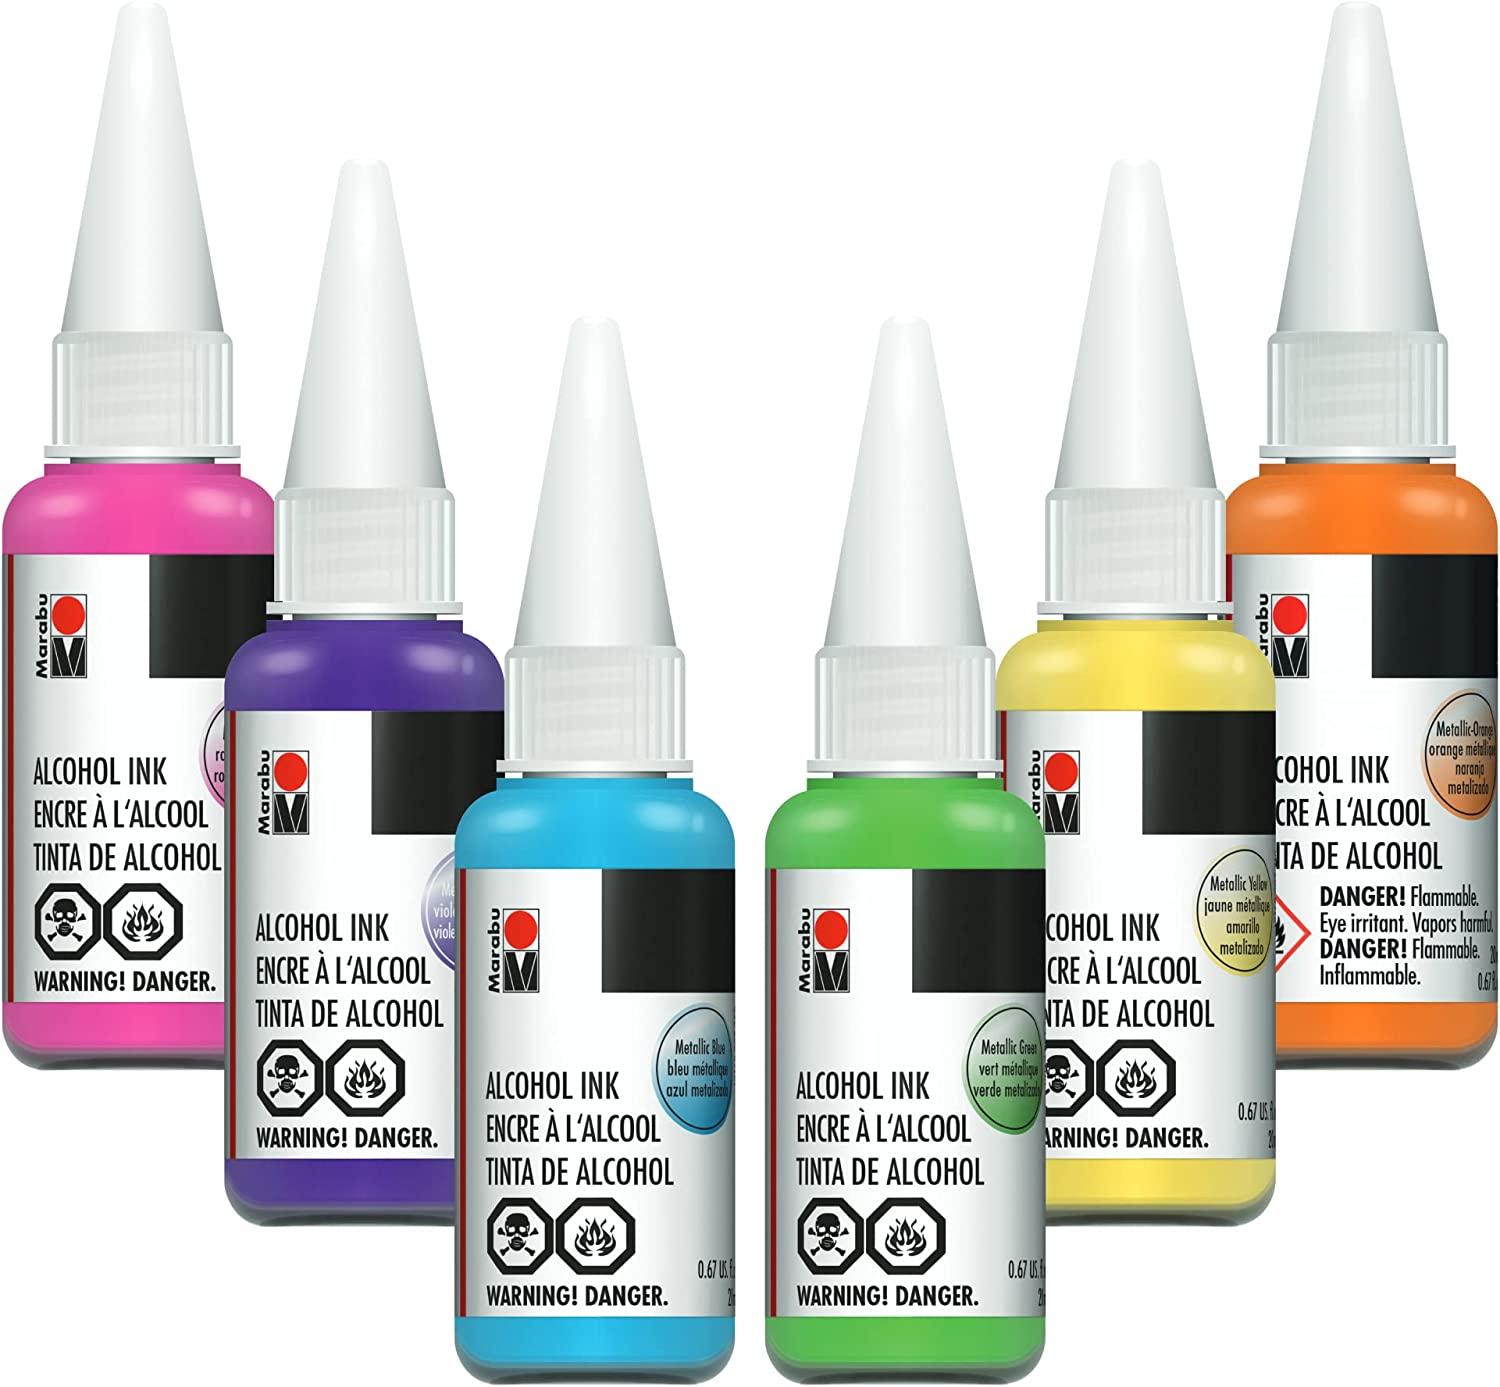 Getting started with alcohol inks: A review of alcohol ink brands